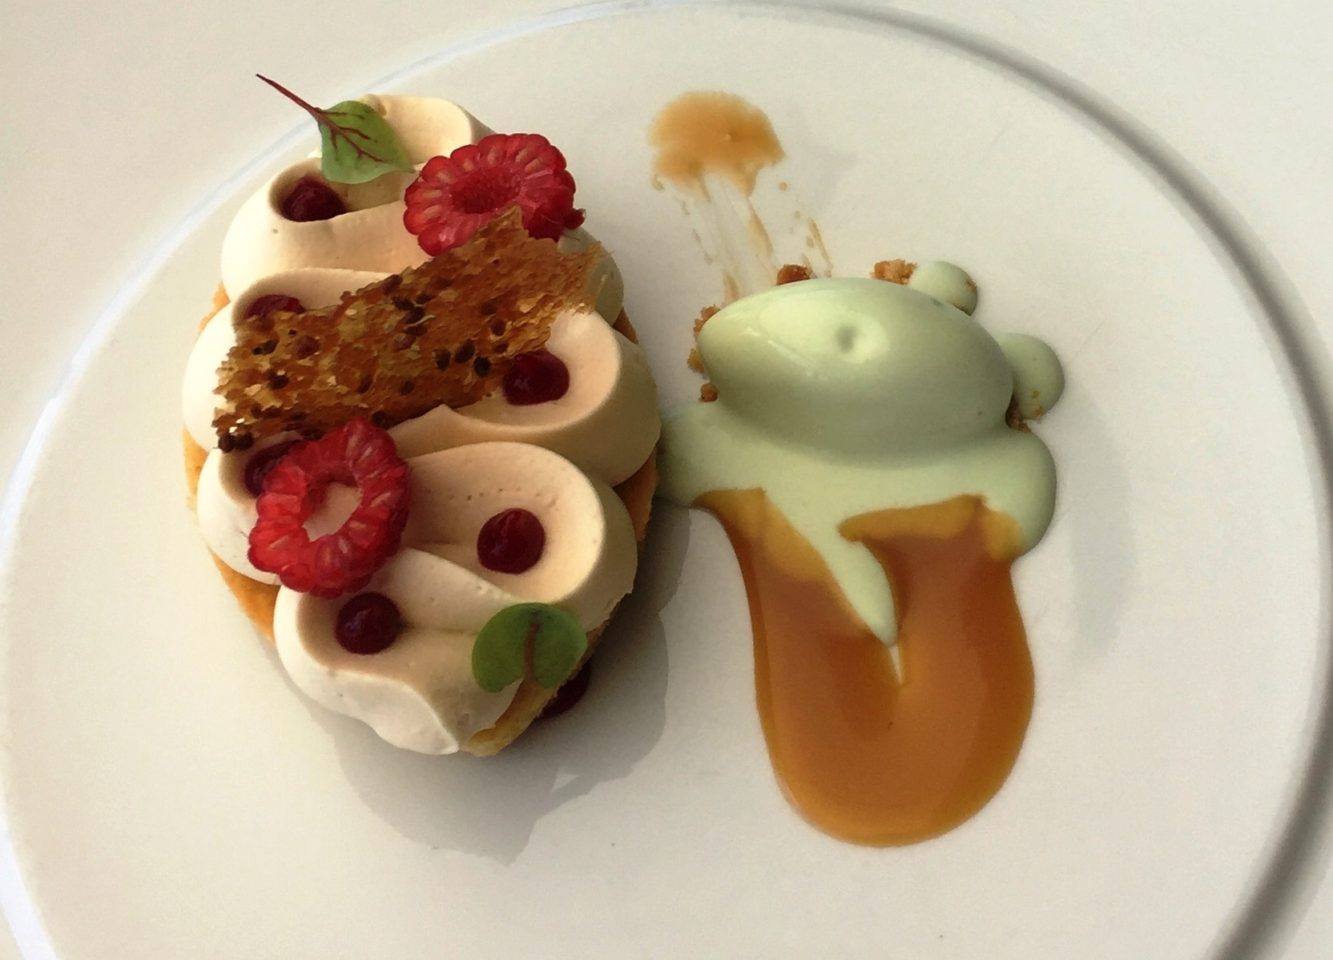 A dessert at Chateau Eza in Eze near Nice ~ Sable Breton aux Saveurs de Provence ~ Chocolat dulcey, confit framboises et gingembre, caramel au thym, creme glacee fenouil ~ When in Nice, we live to eat !